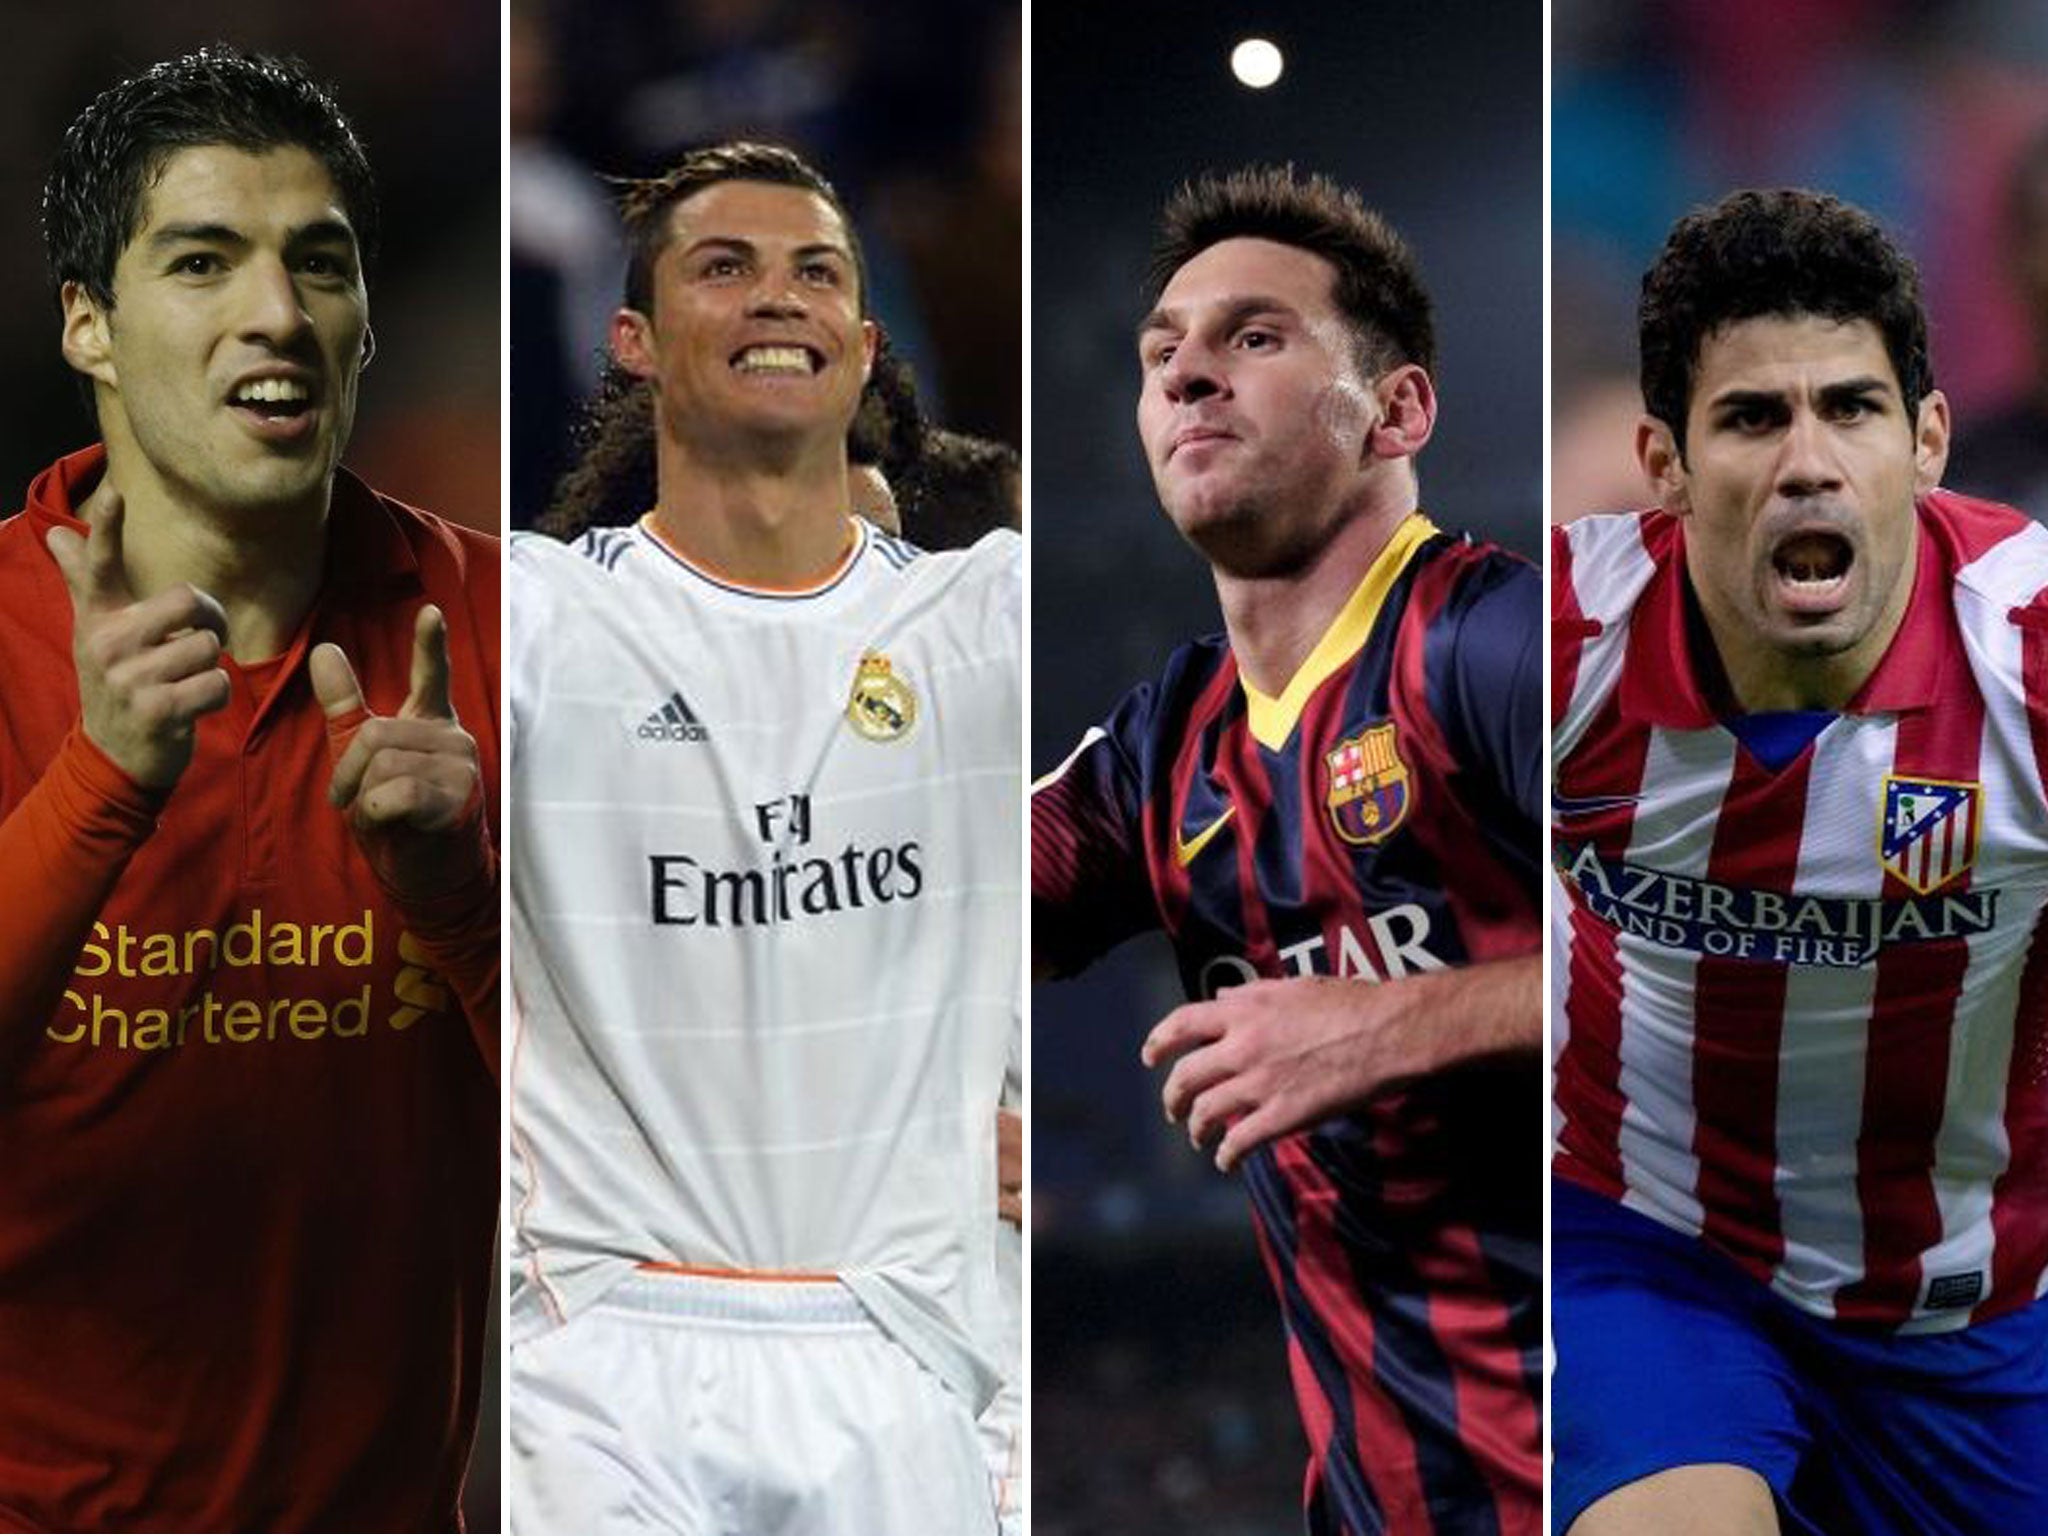 Scoring for fun: Goals are coming thick and fast for (left to right) Luis Suarez, Ronaldo,Leo Messi and Diego Costa